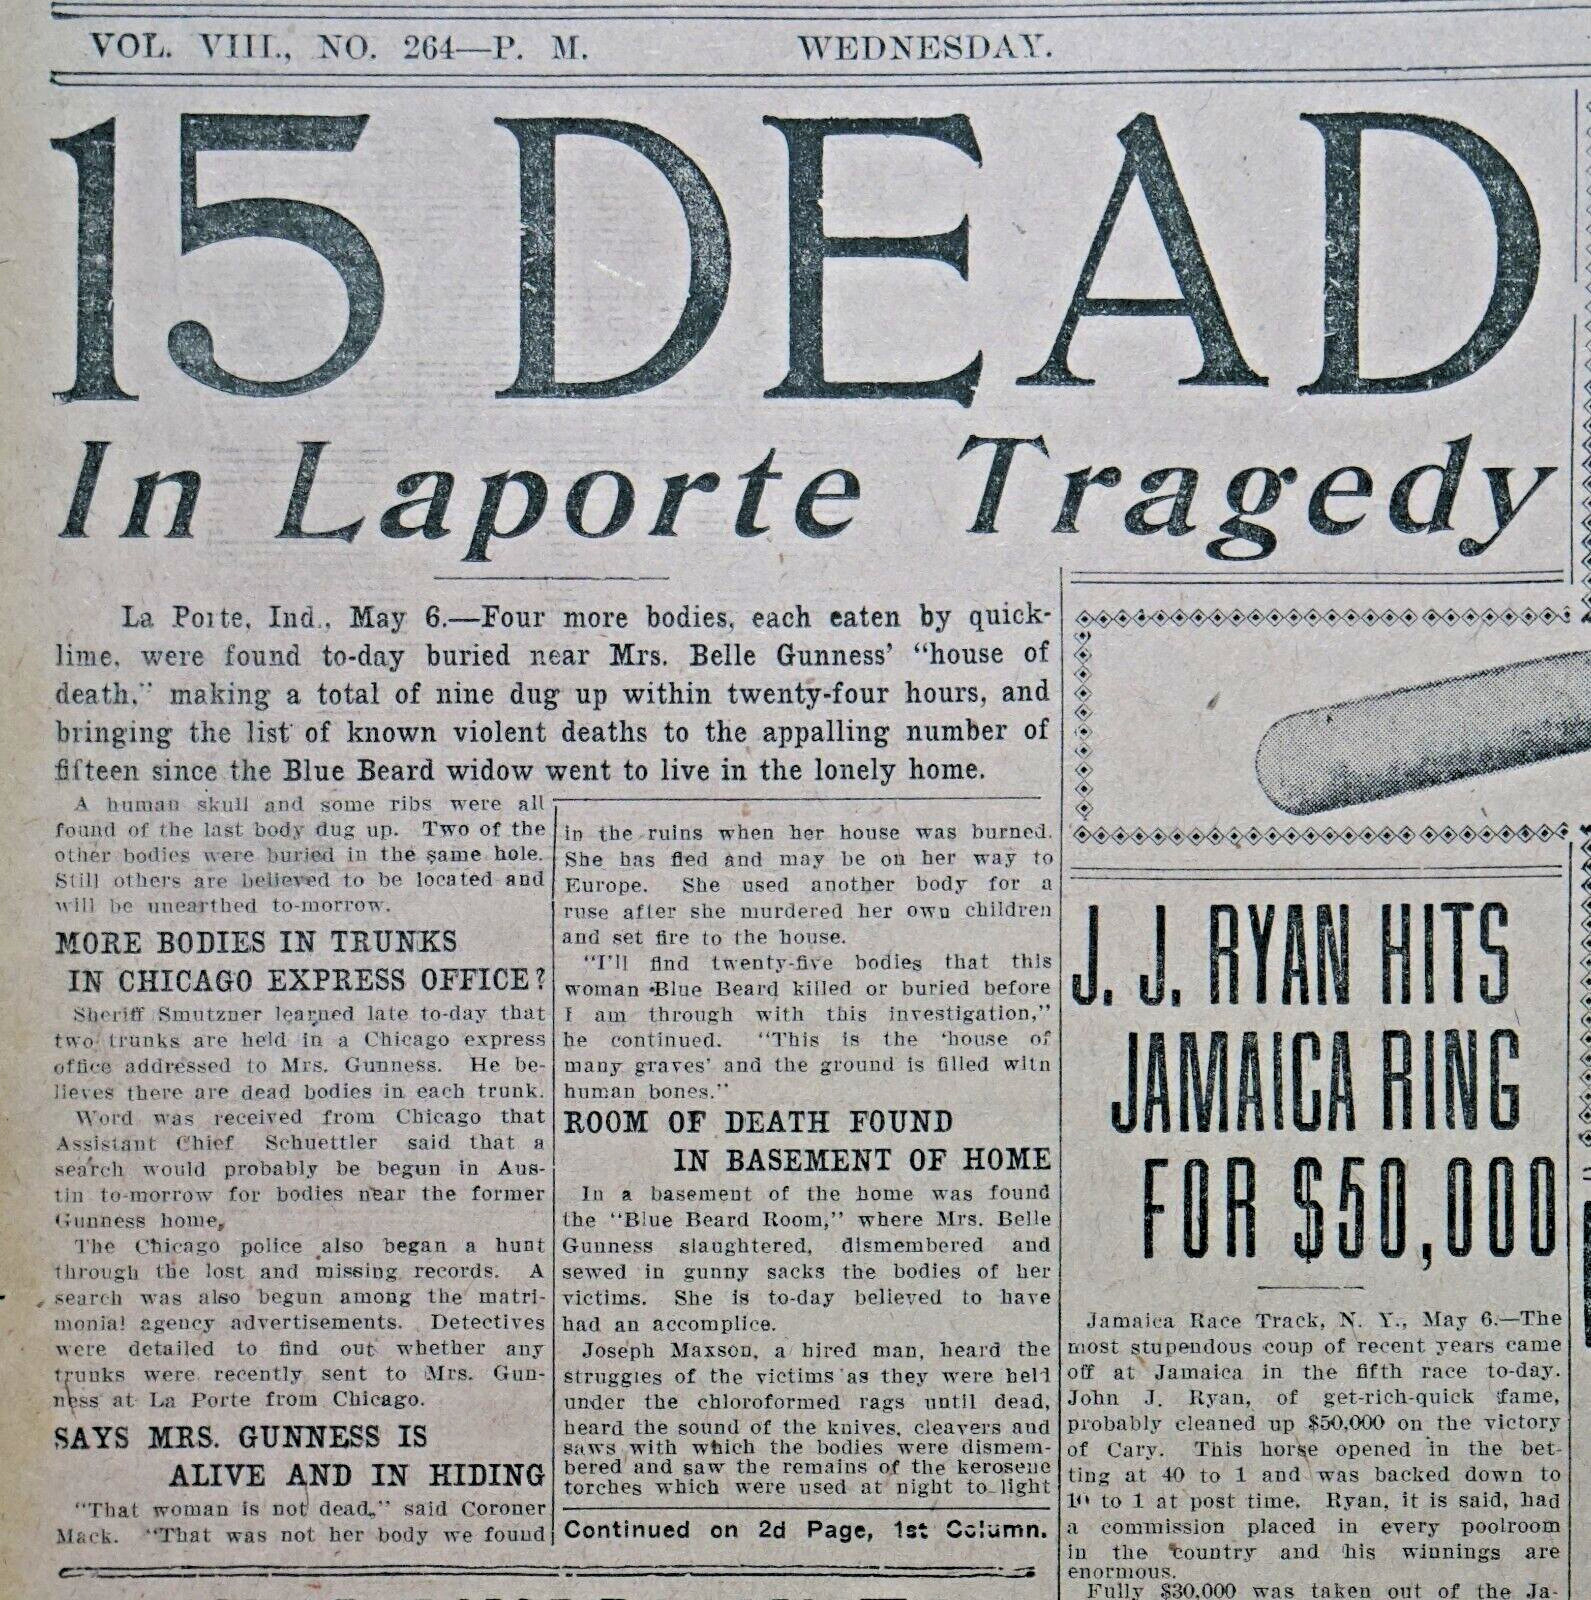 1908 Chicago Front Page - 15 Dead in Laporte, Indiana Tragedy, Belle Gunness